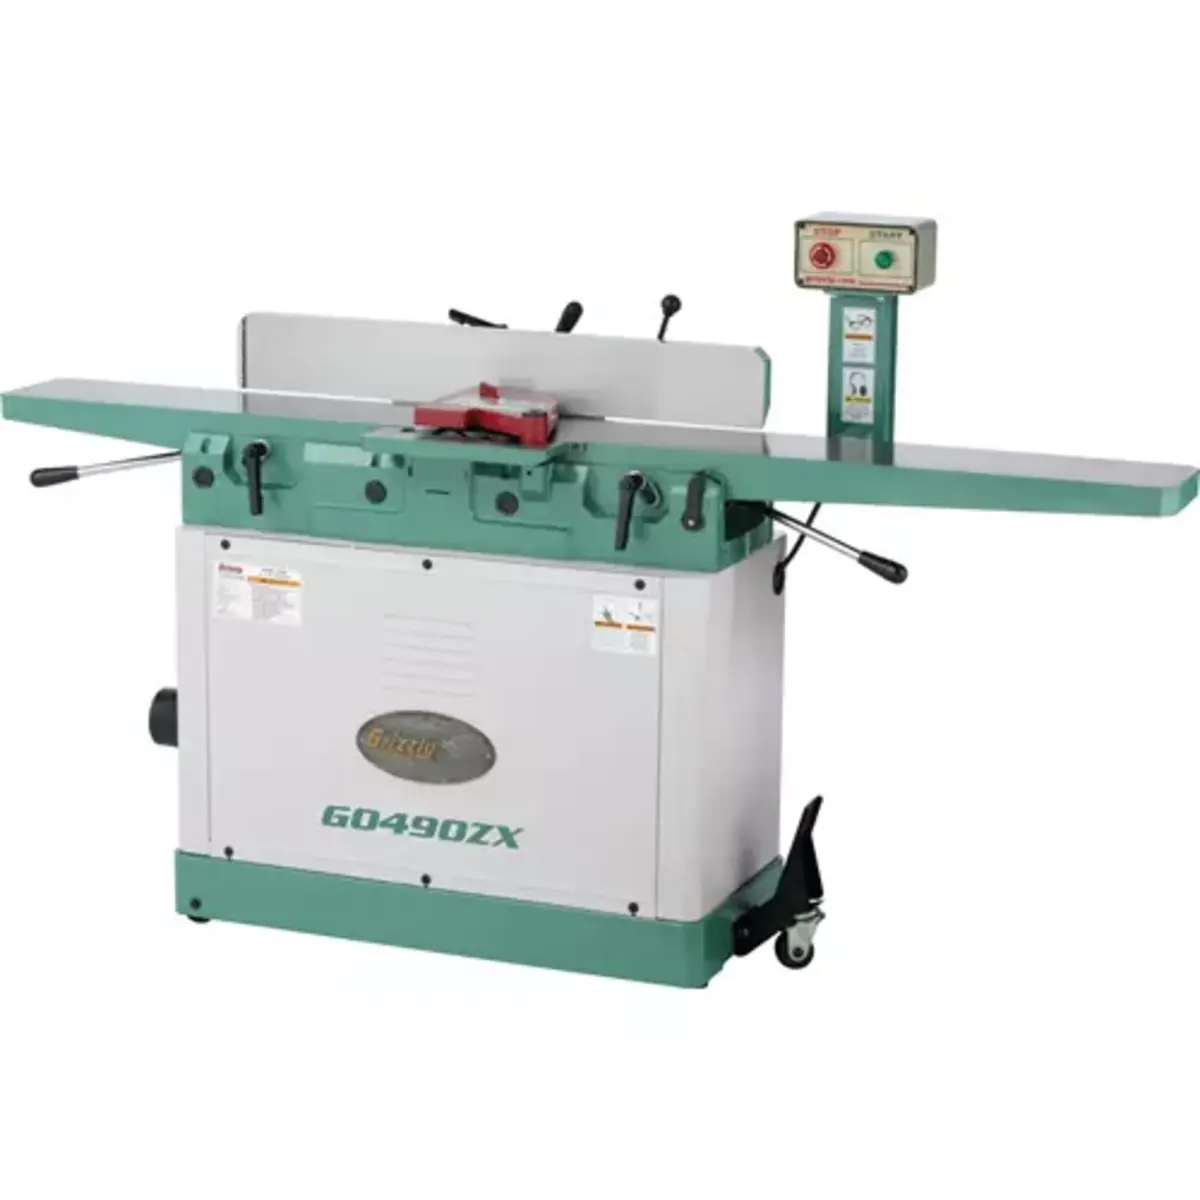 New 8” Jointer From Grizzly Industrial - Woodshop News